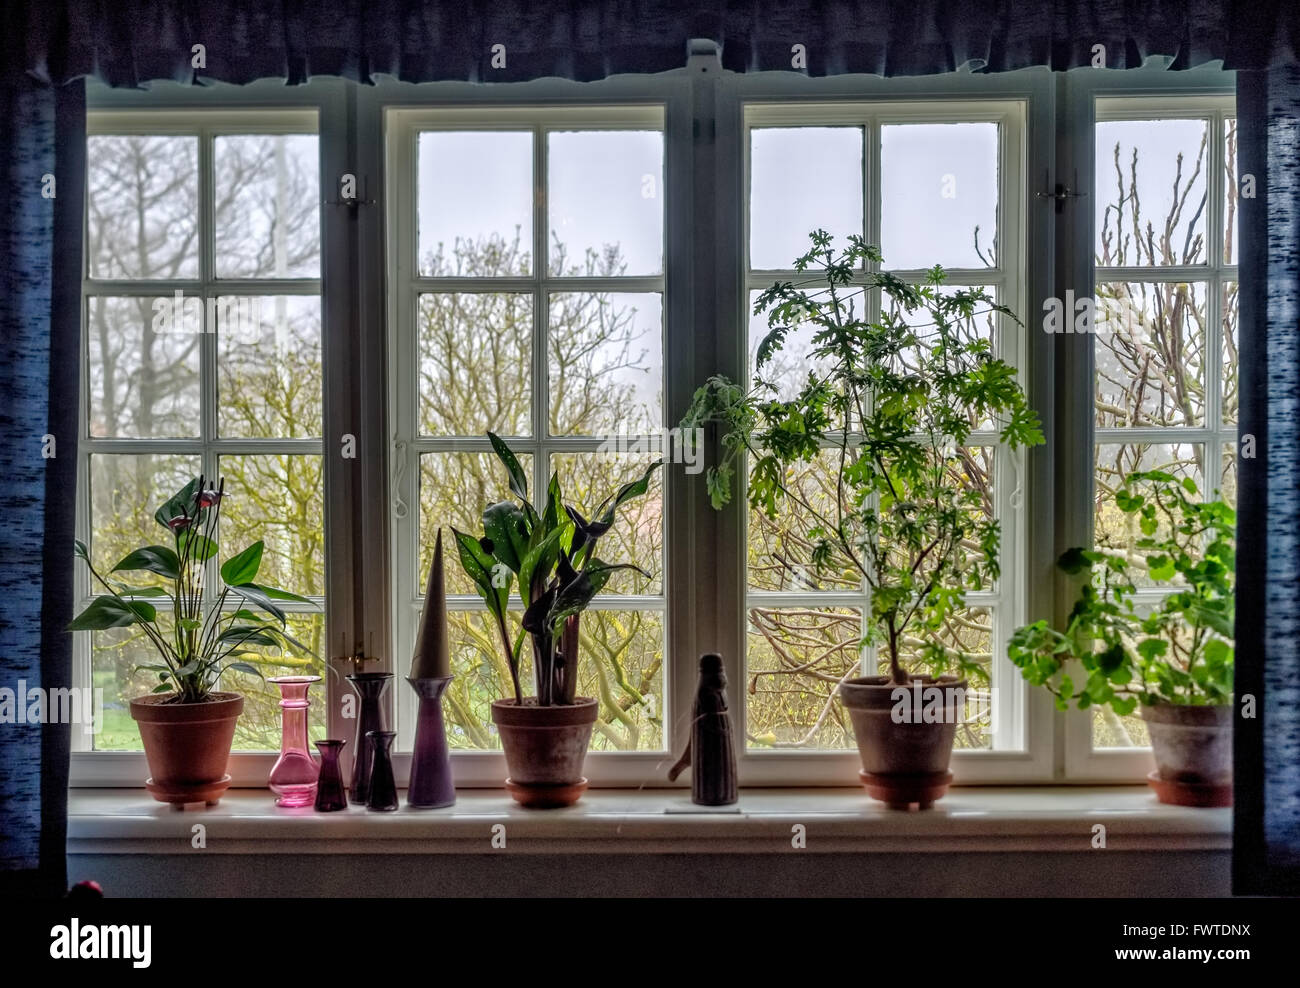 Window sill with flowers in pots Stock Photo